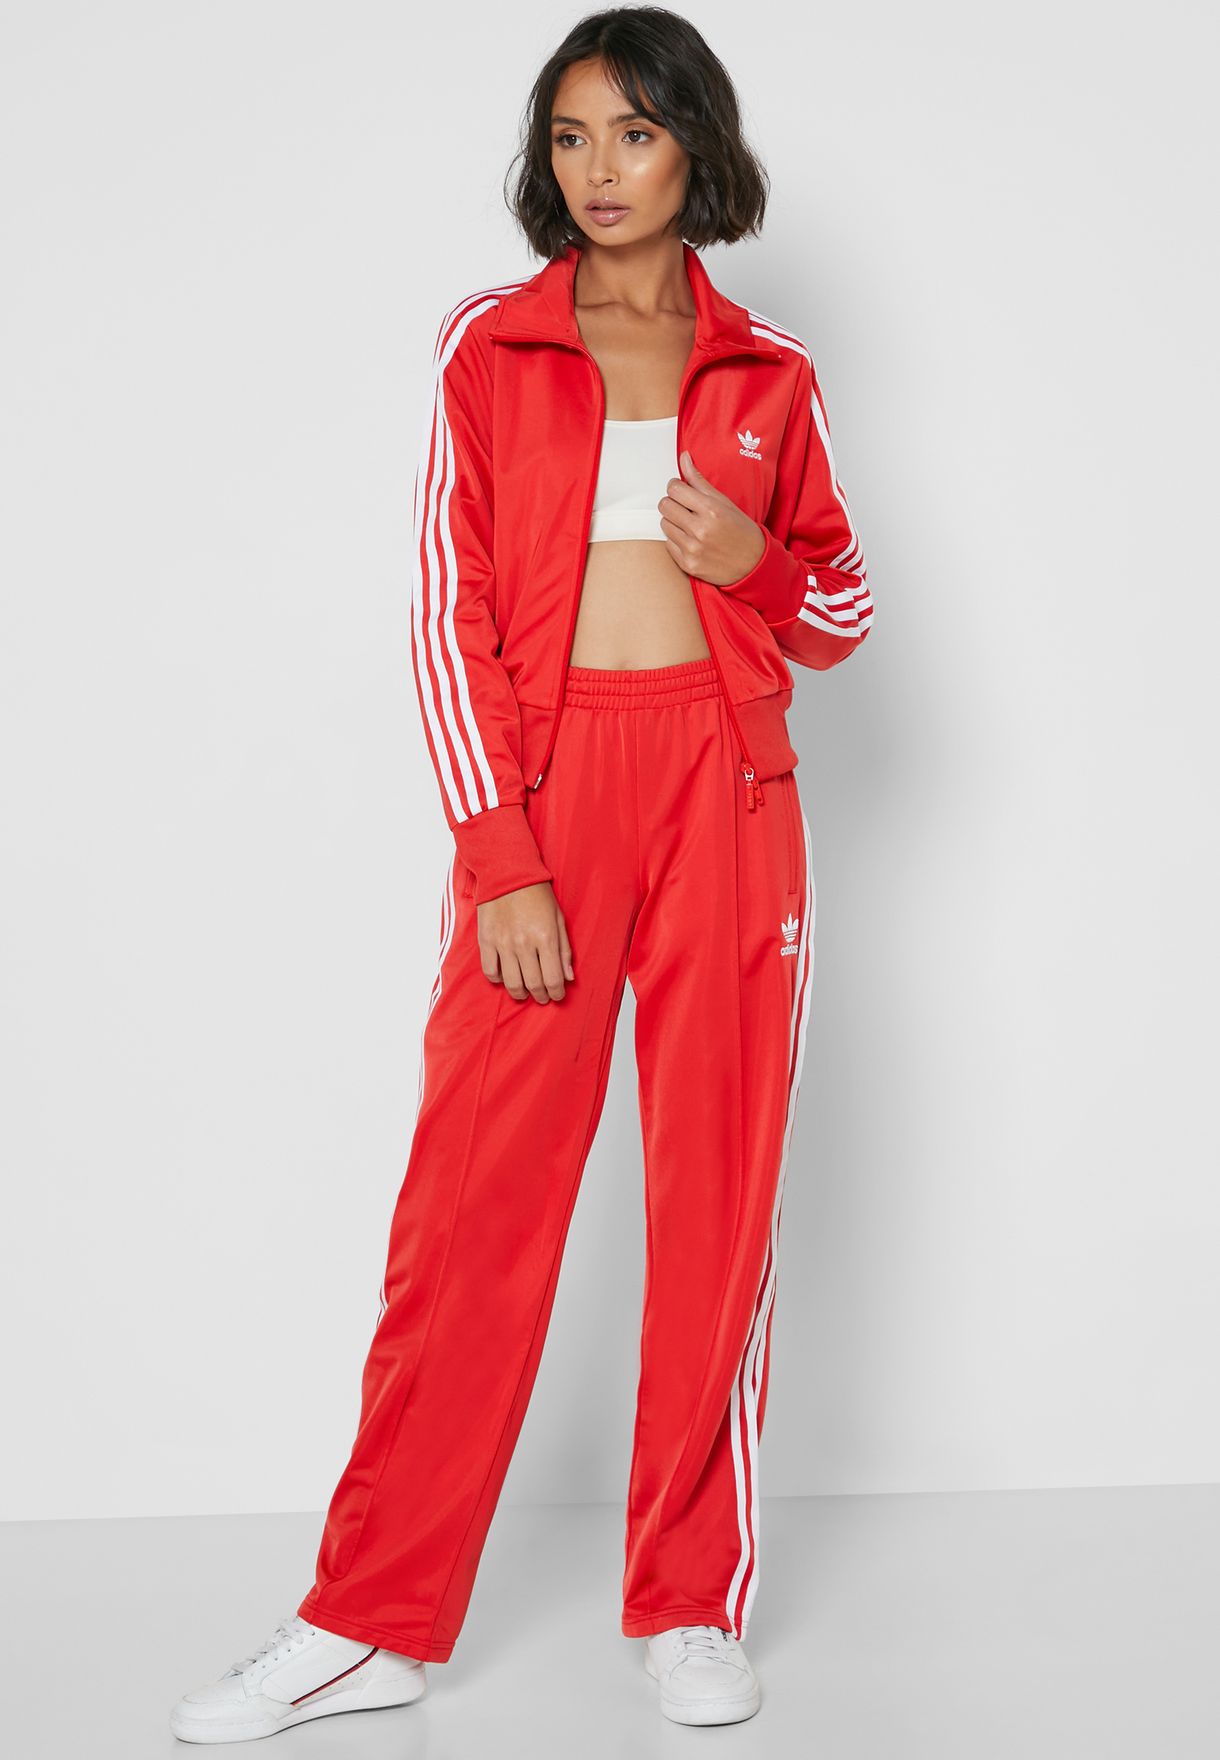 red adidas track pants women